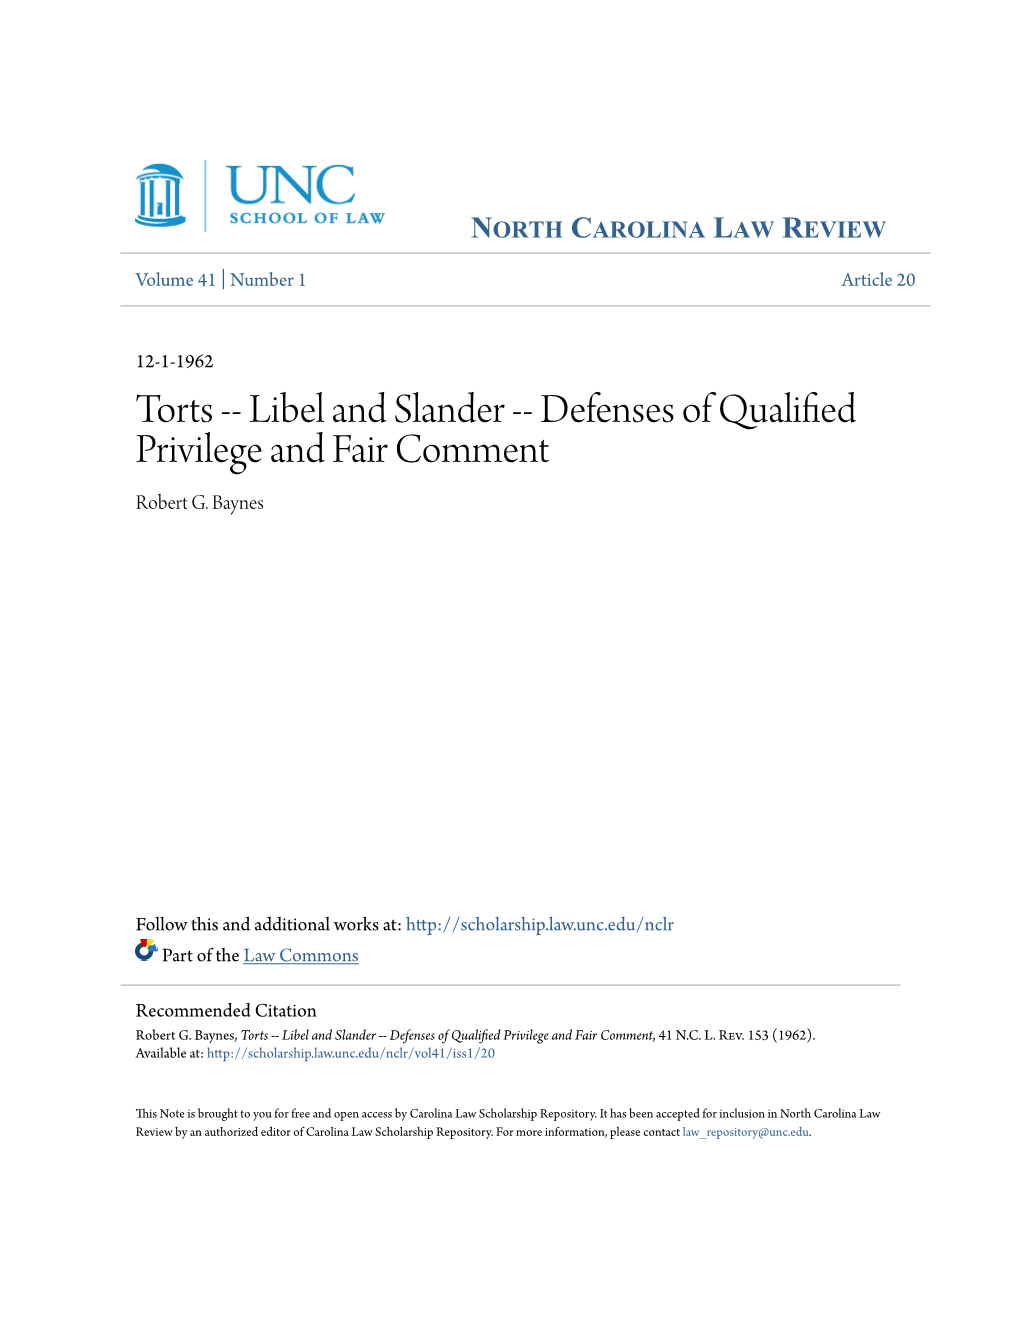 Libel and Slander -- Defenses of Qualified Privilege and Fair Comment Robert G